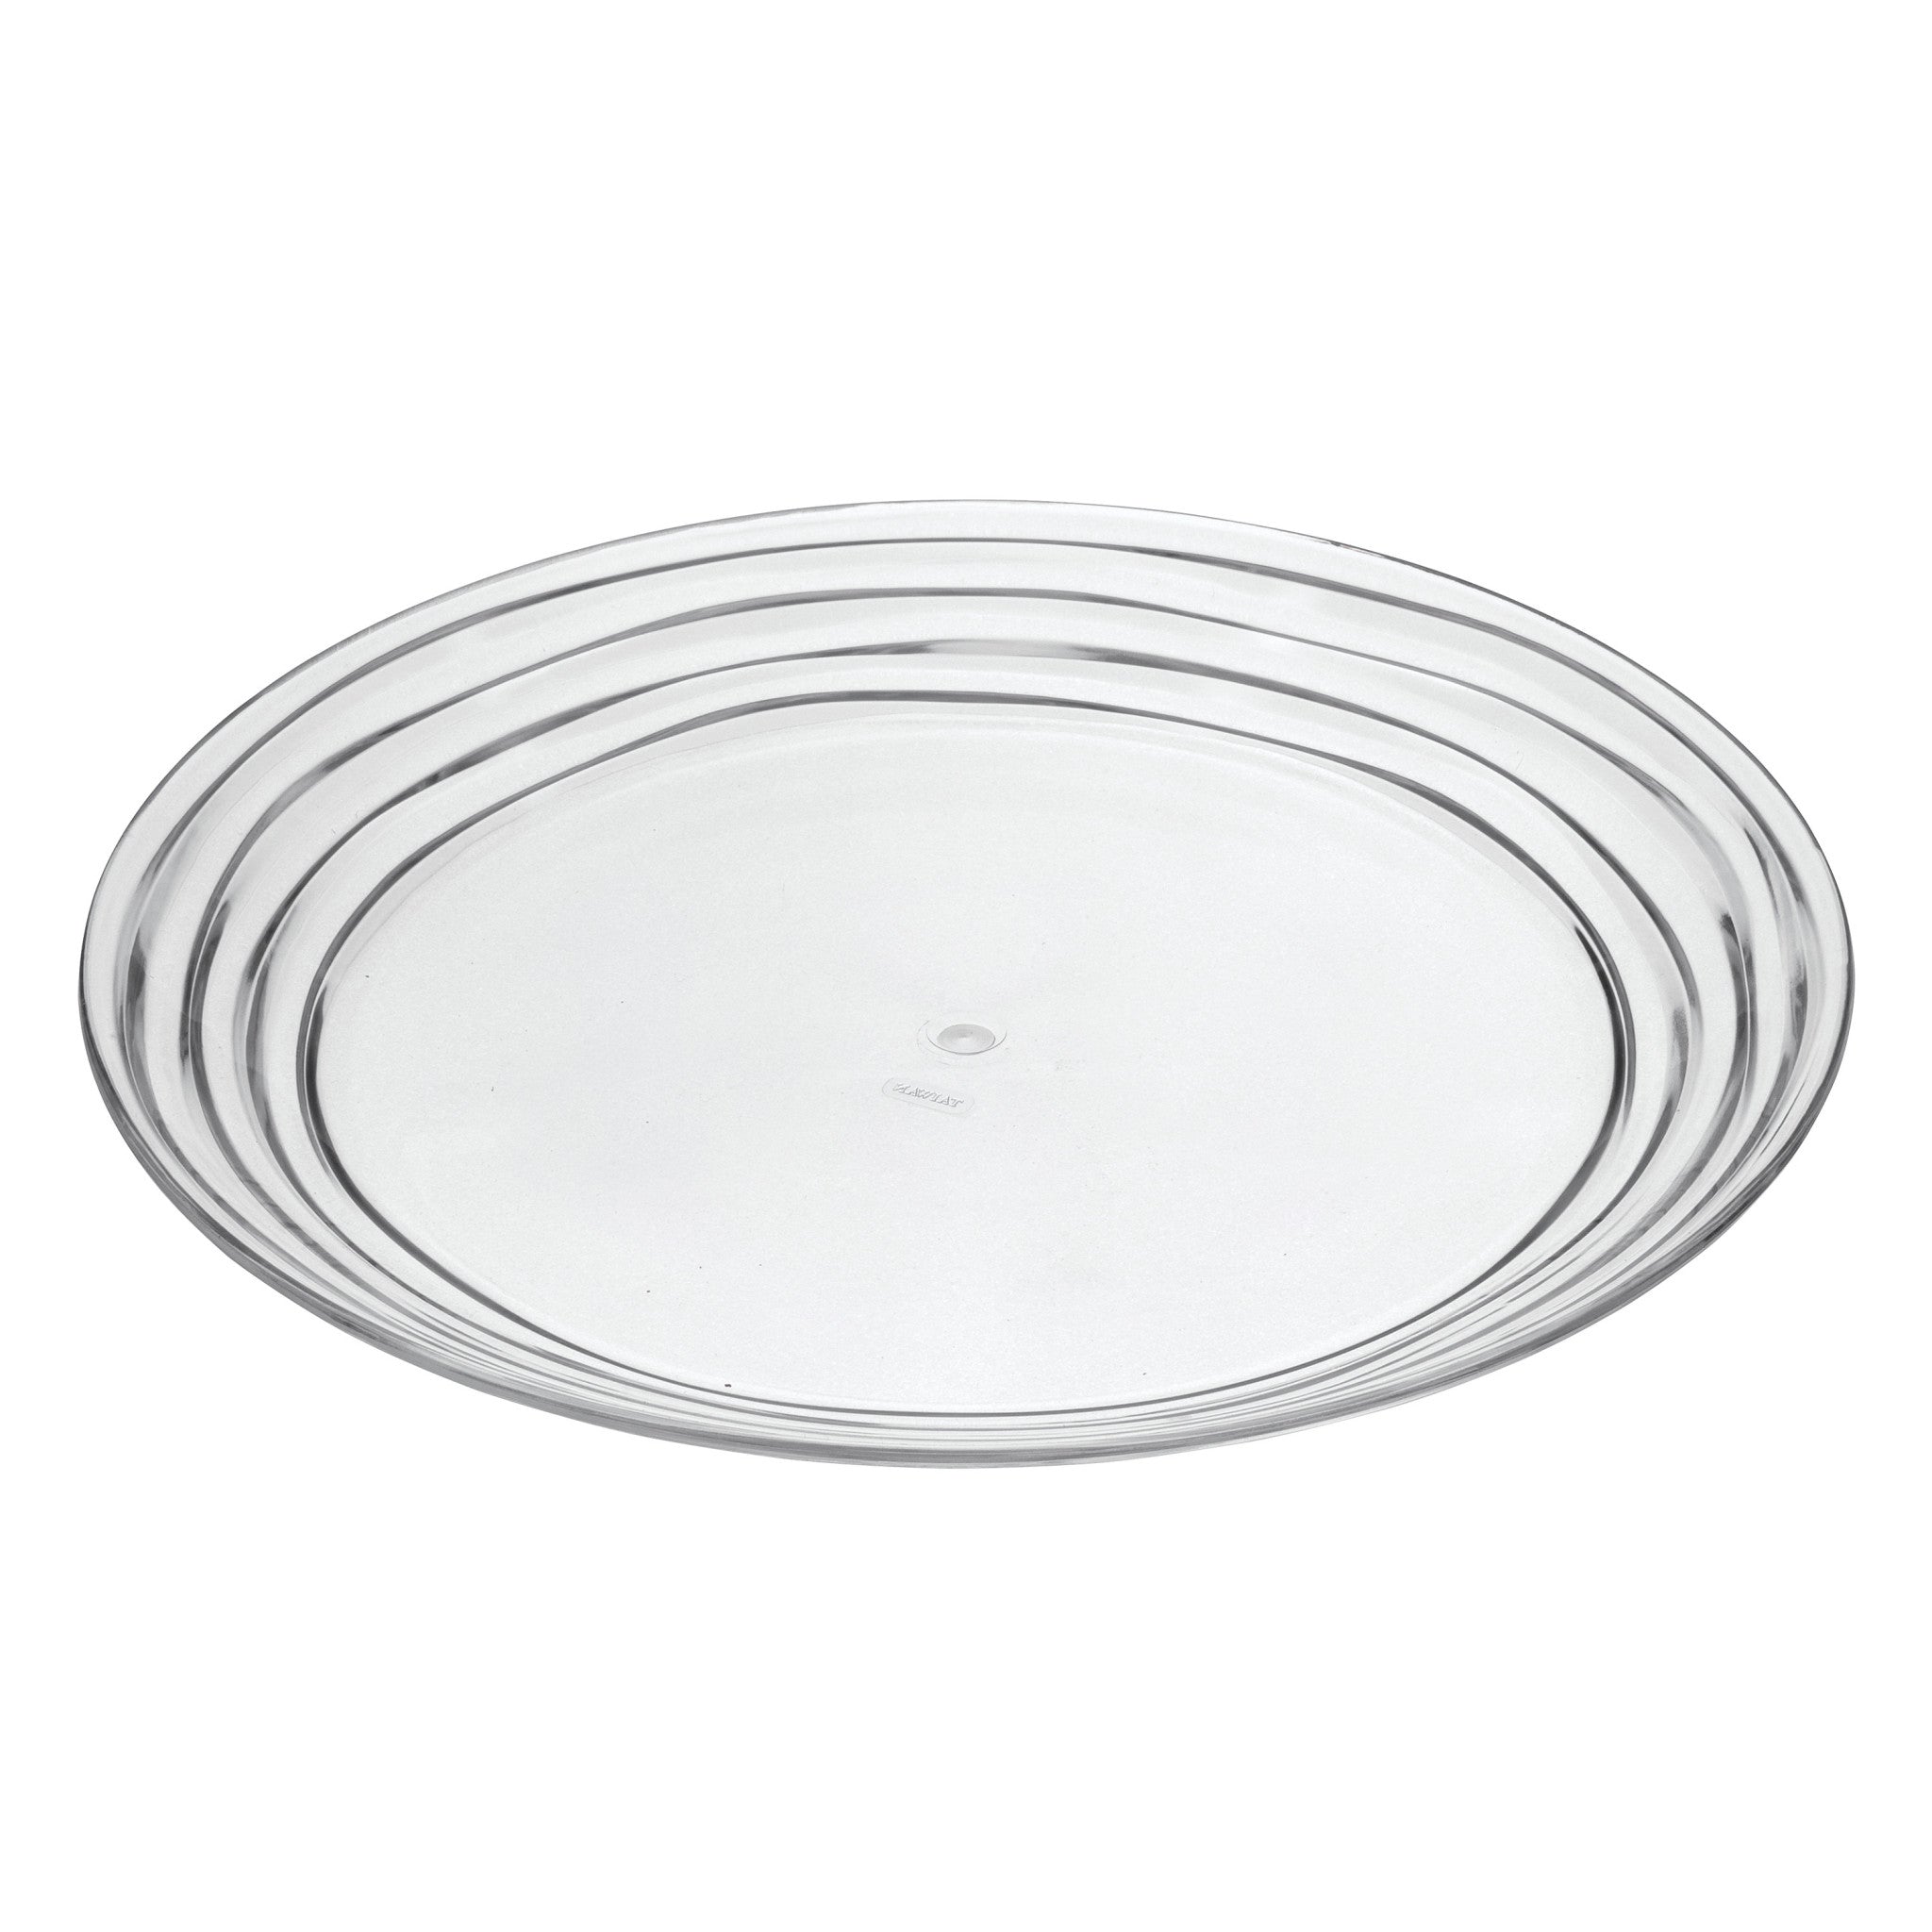 Clear-Four-Piece-Round-Swirl-Acrylic-Service-For-Four-Dinner-Plate-Set-Dinnerware-Sets